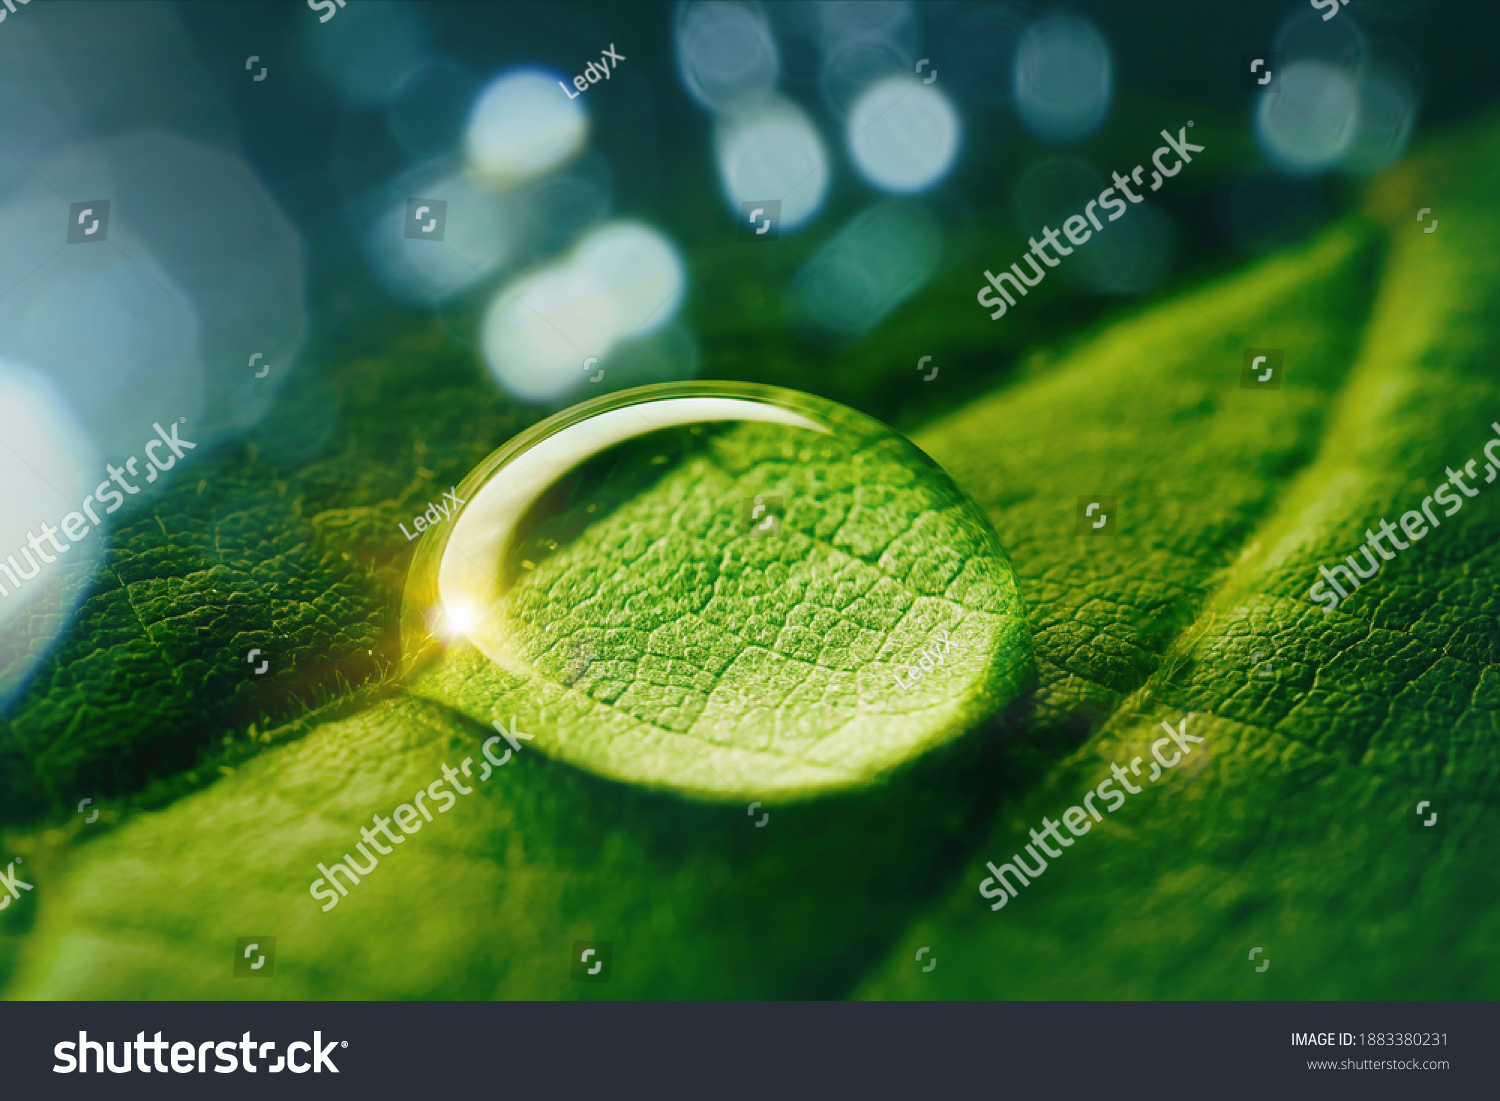 Beauty transparent drop of water on a green leaf macro with sun glare. Beautiful artistic image of environment nature in spring or summer. #1883380231